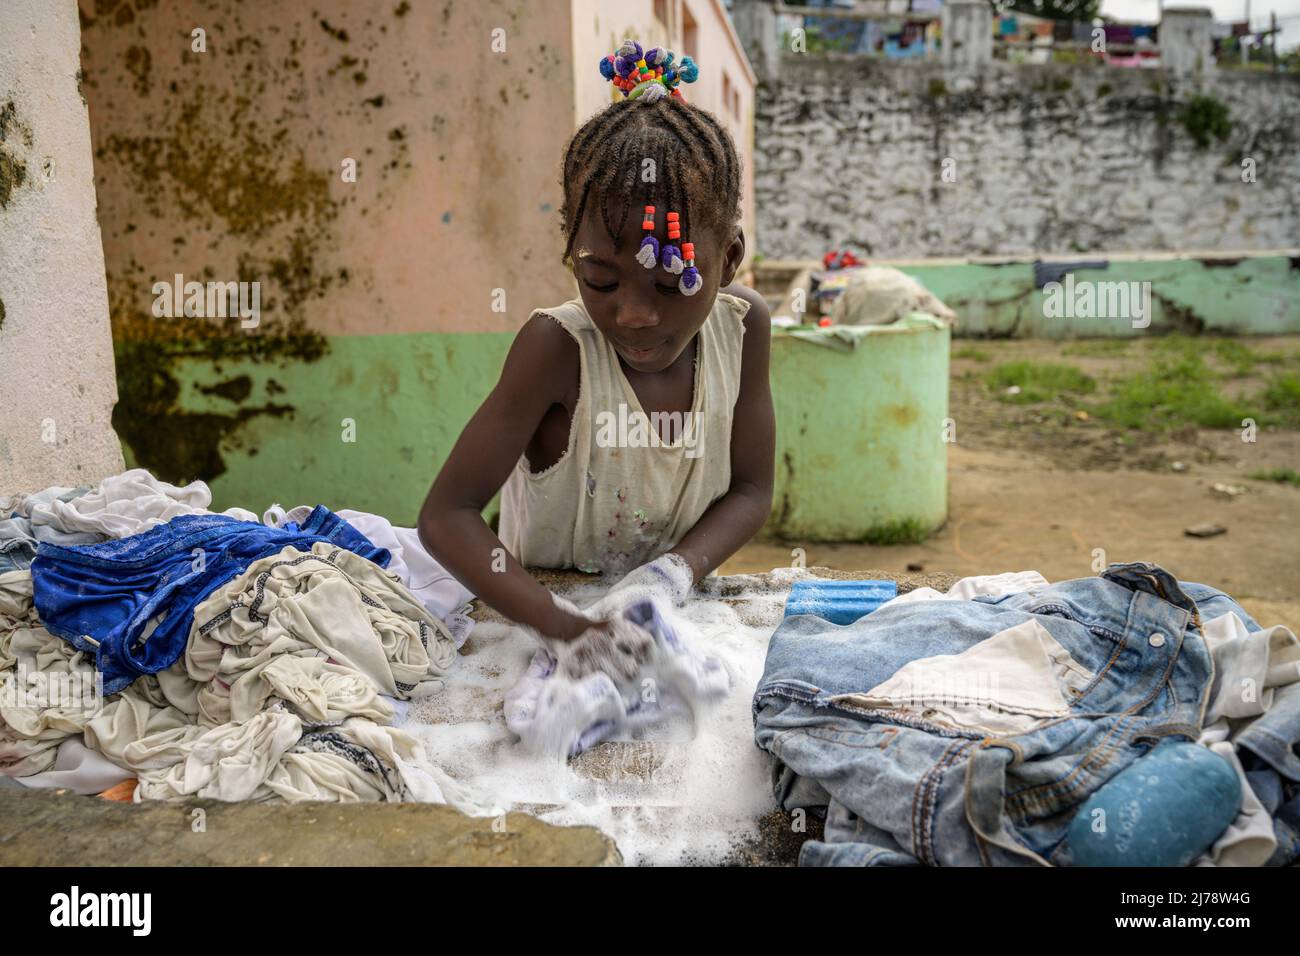 Girl handwashing clothes at the washing place of Roça Agostino Neto. Roça is the name given to the old colonial plantations in Sao Tomé and Principe. Stock Photo